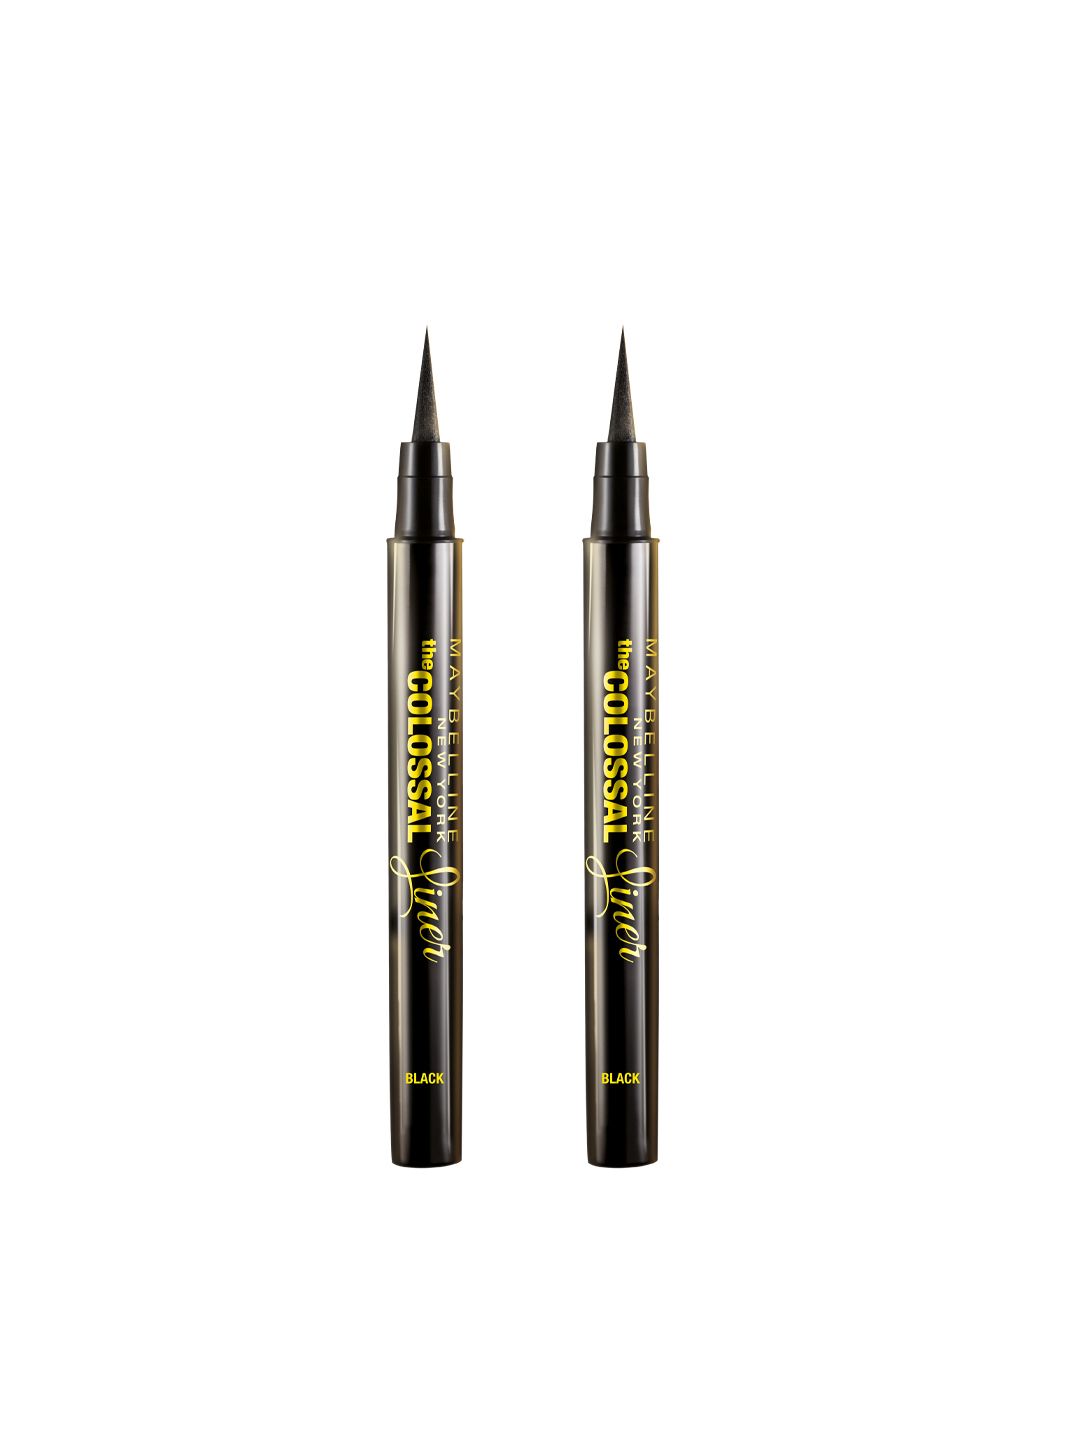 Maybelline Set of 2 The Colossal Black Eyeliners Price in India